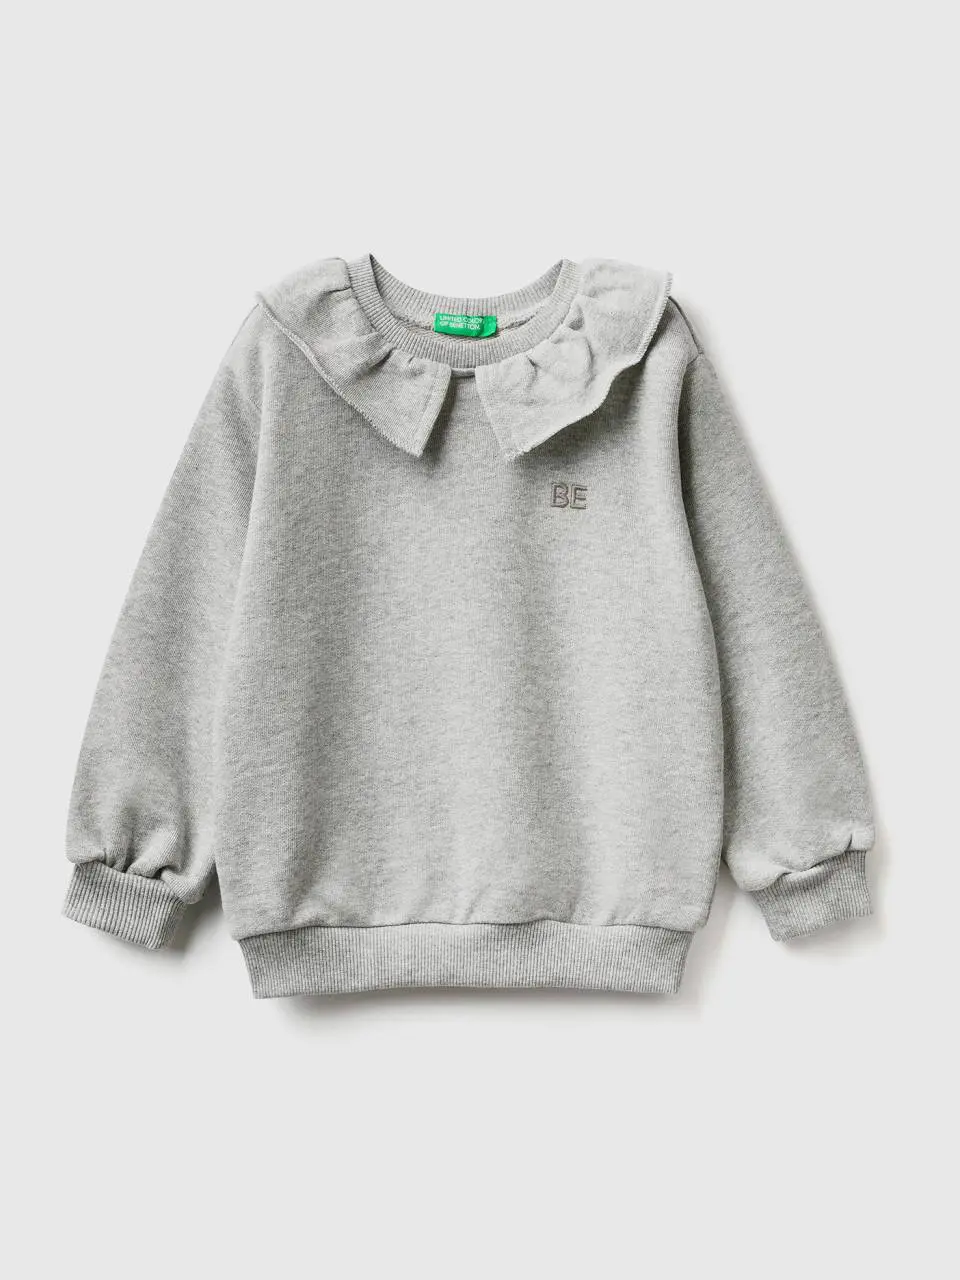 Benetton sweatshirt with collar and "be" embroidery. 1